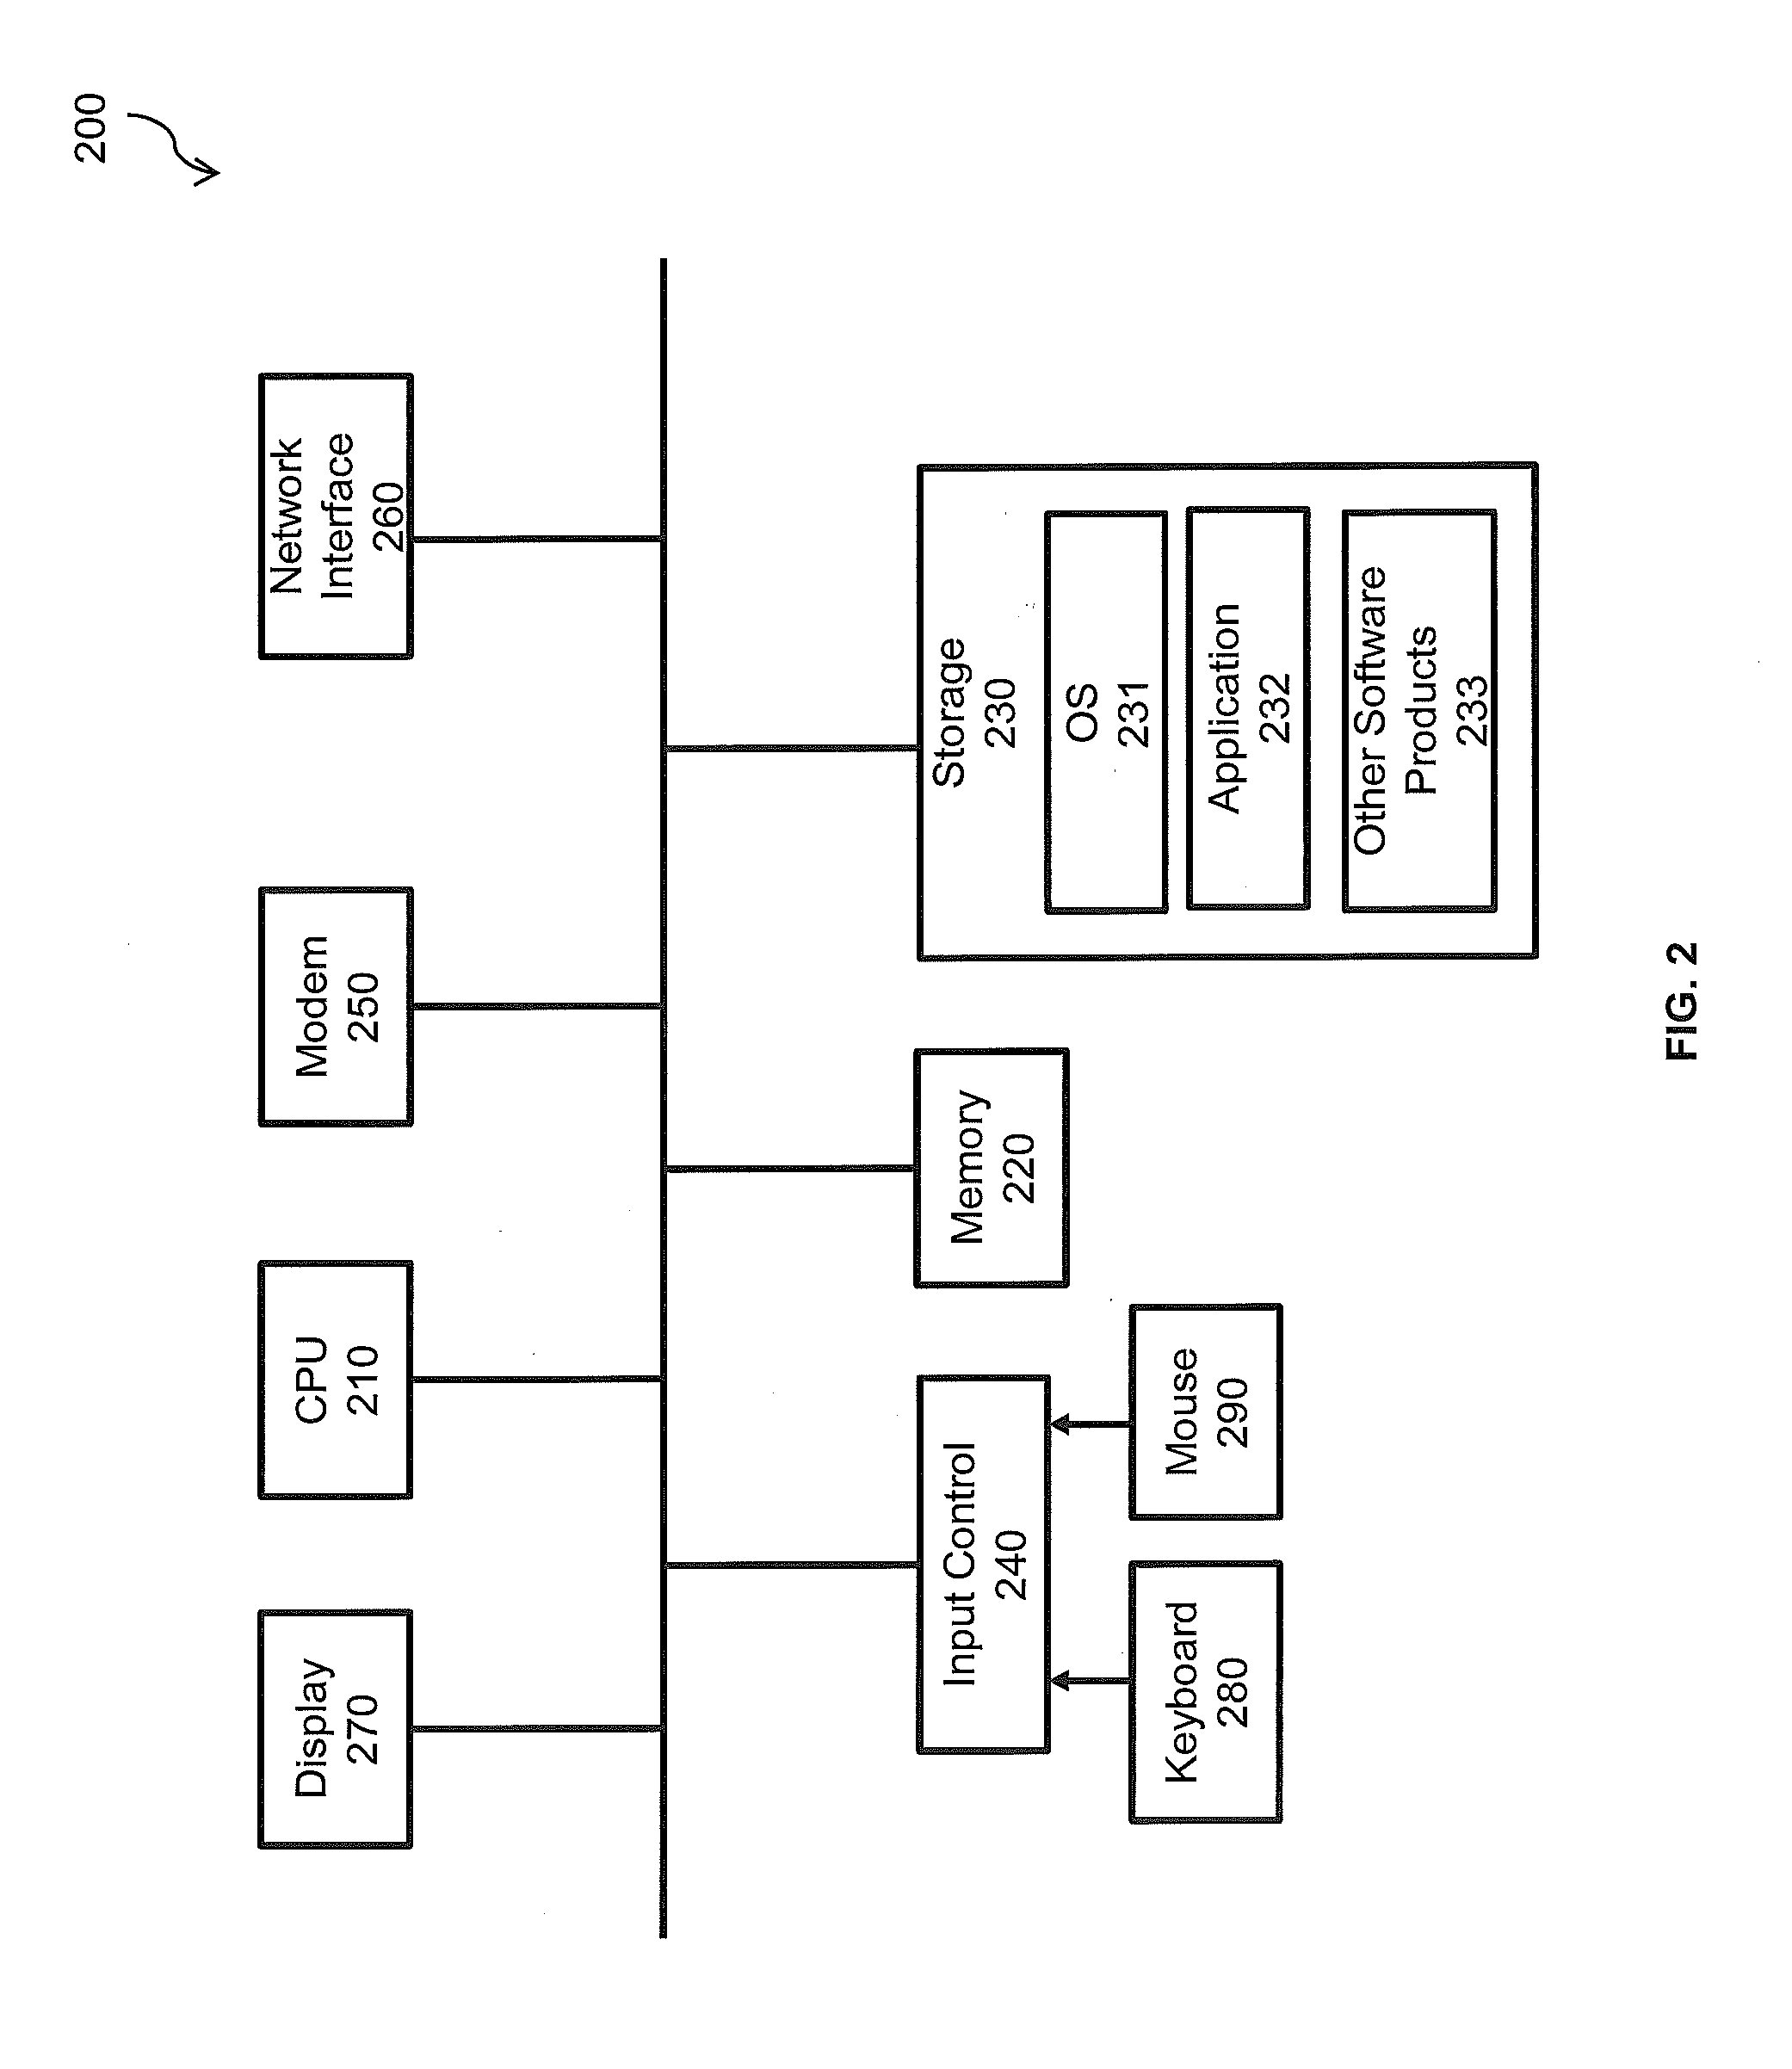 Managing dependencies between operations in a distributed system